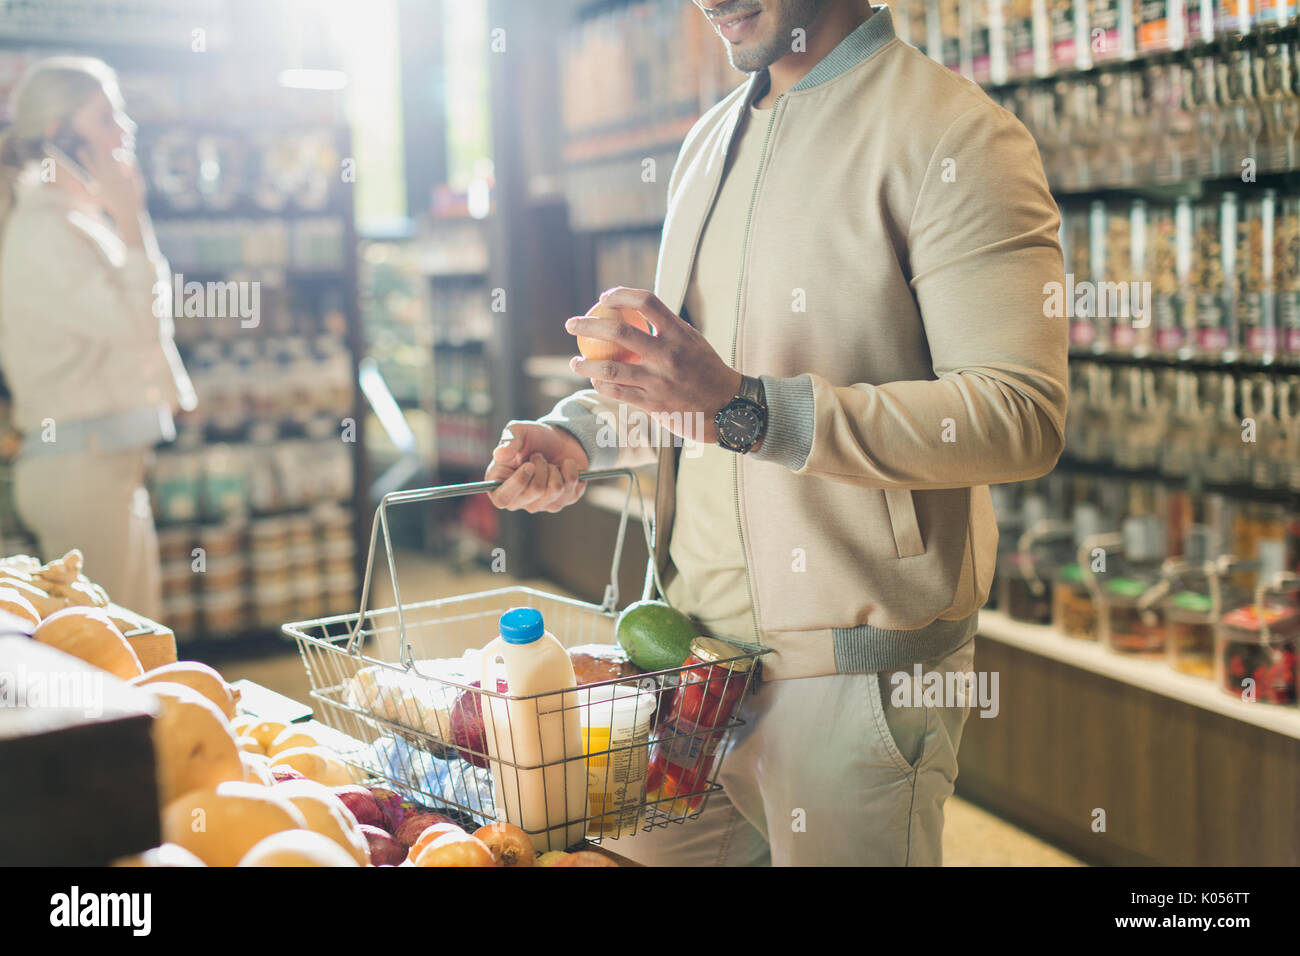 Young man grocery shopping, examining fruit in market Stock Photo